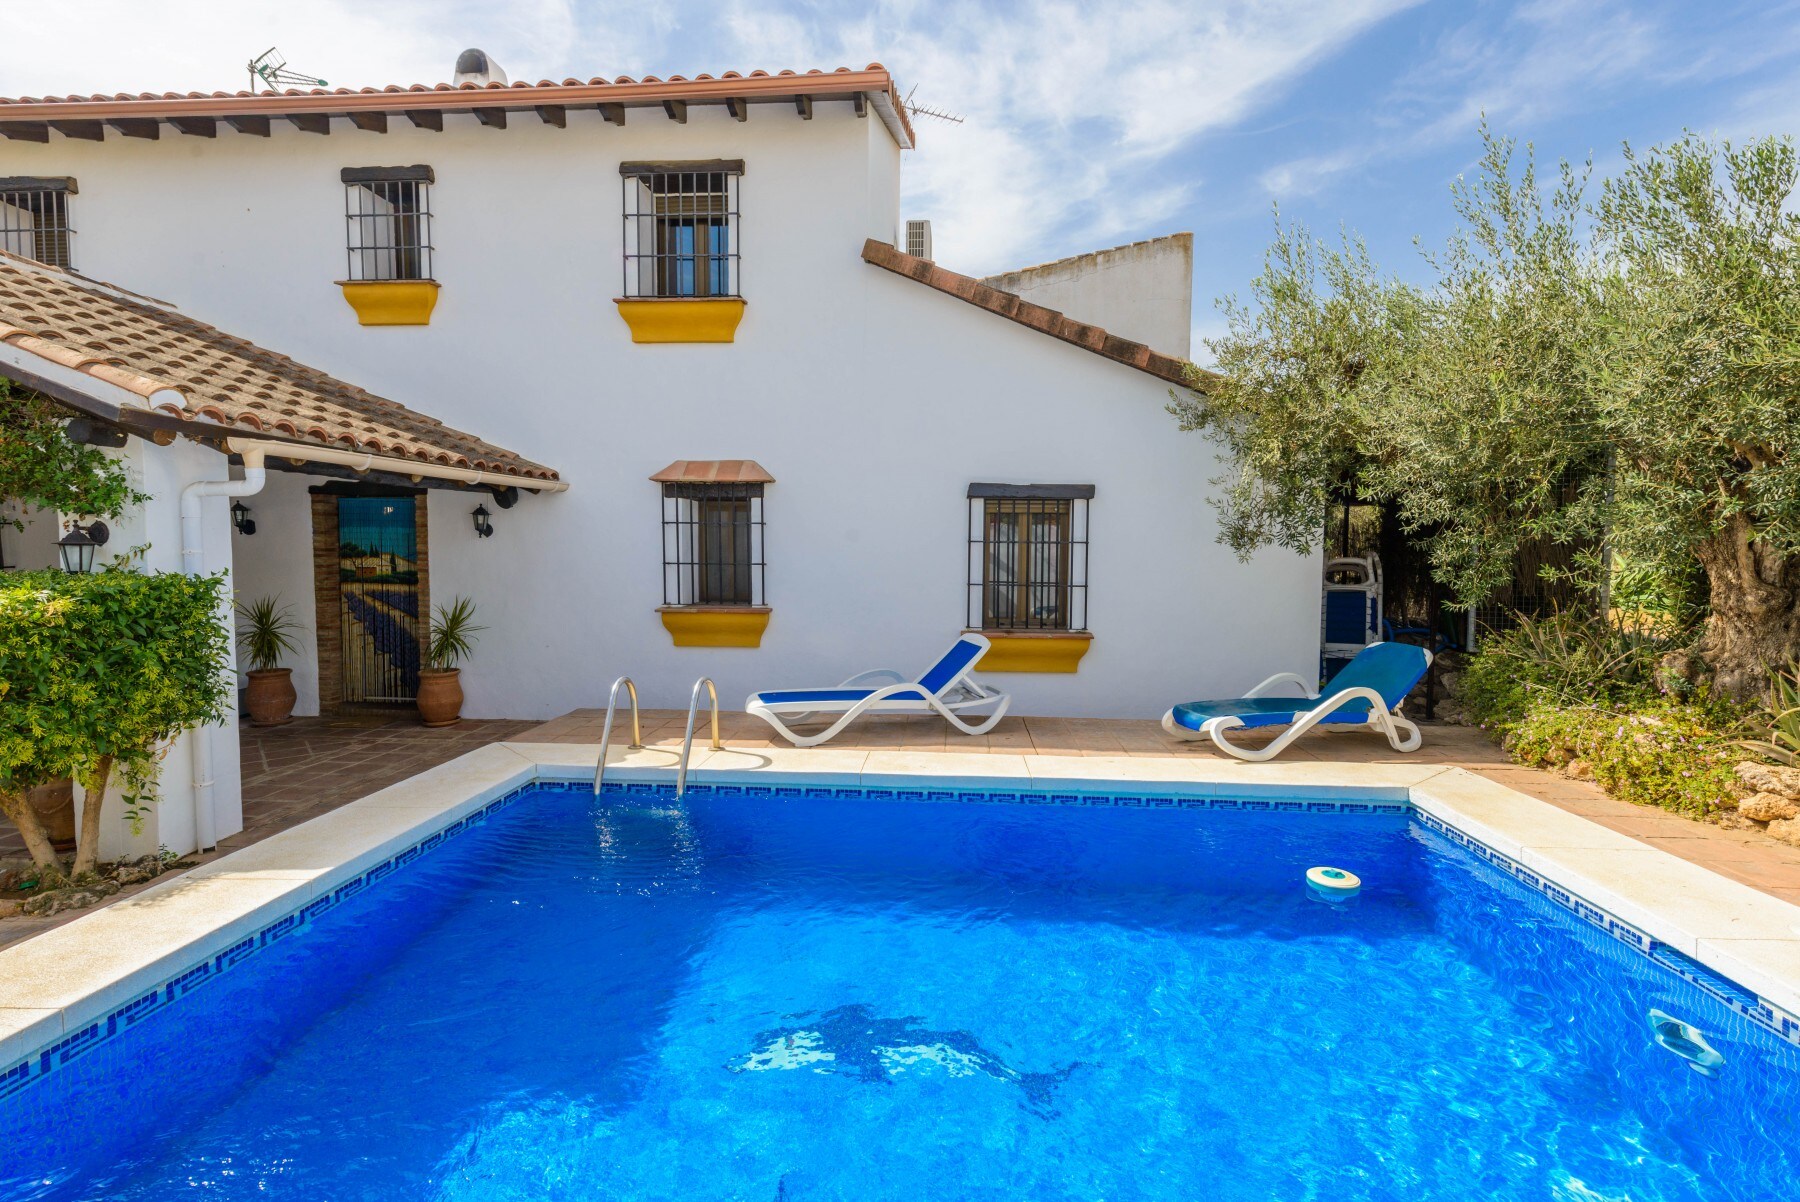 Enjoy the pool of this house with fireplace in Alhaurín el Grande